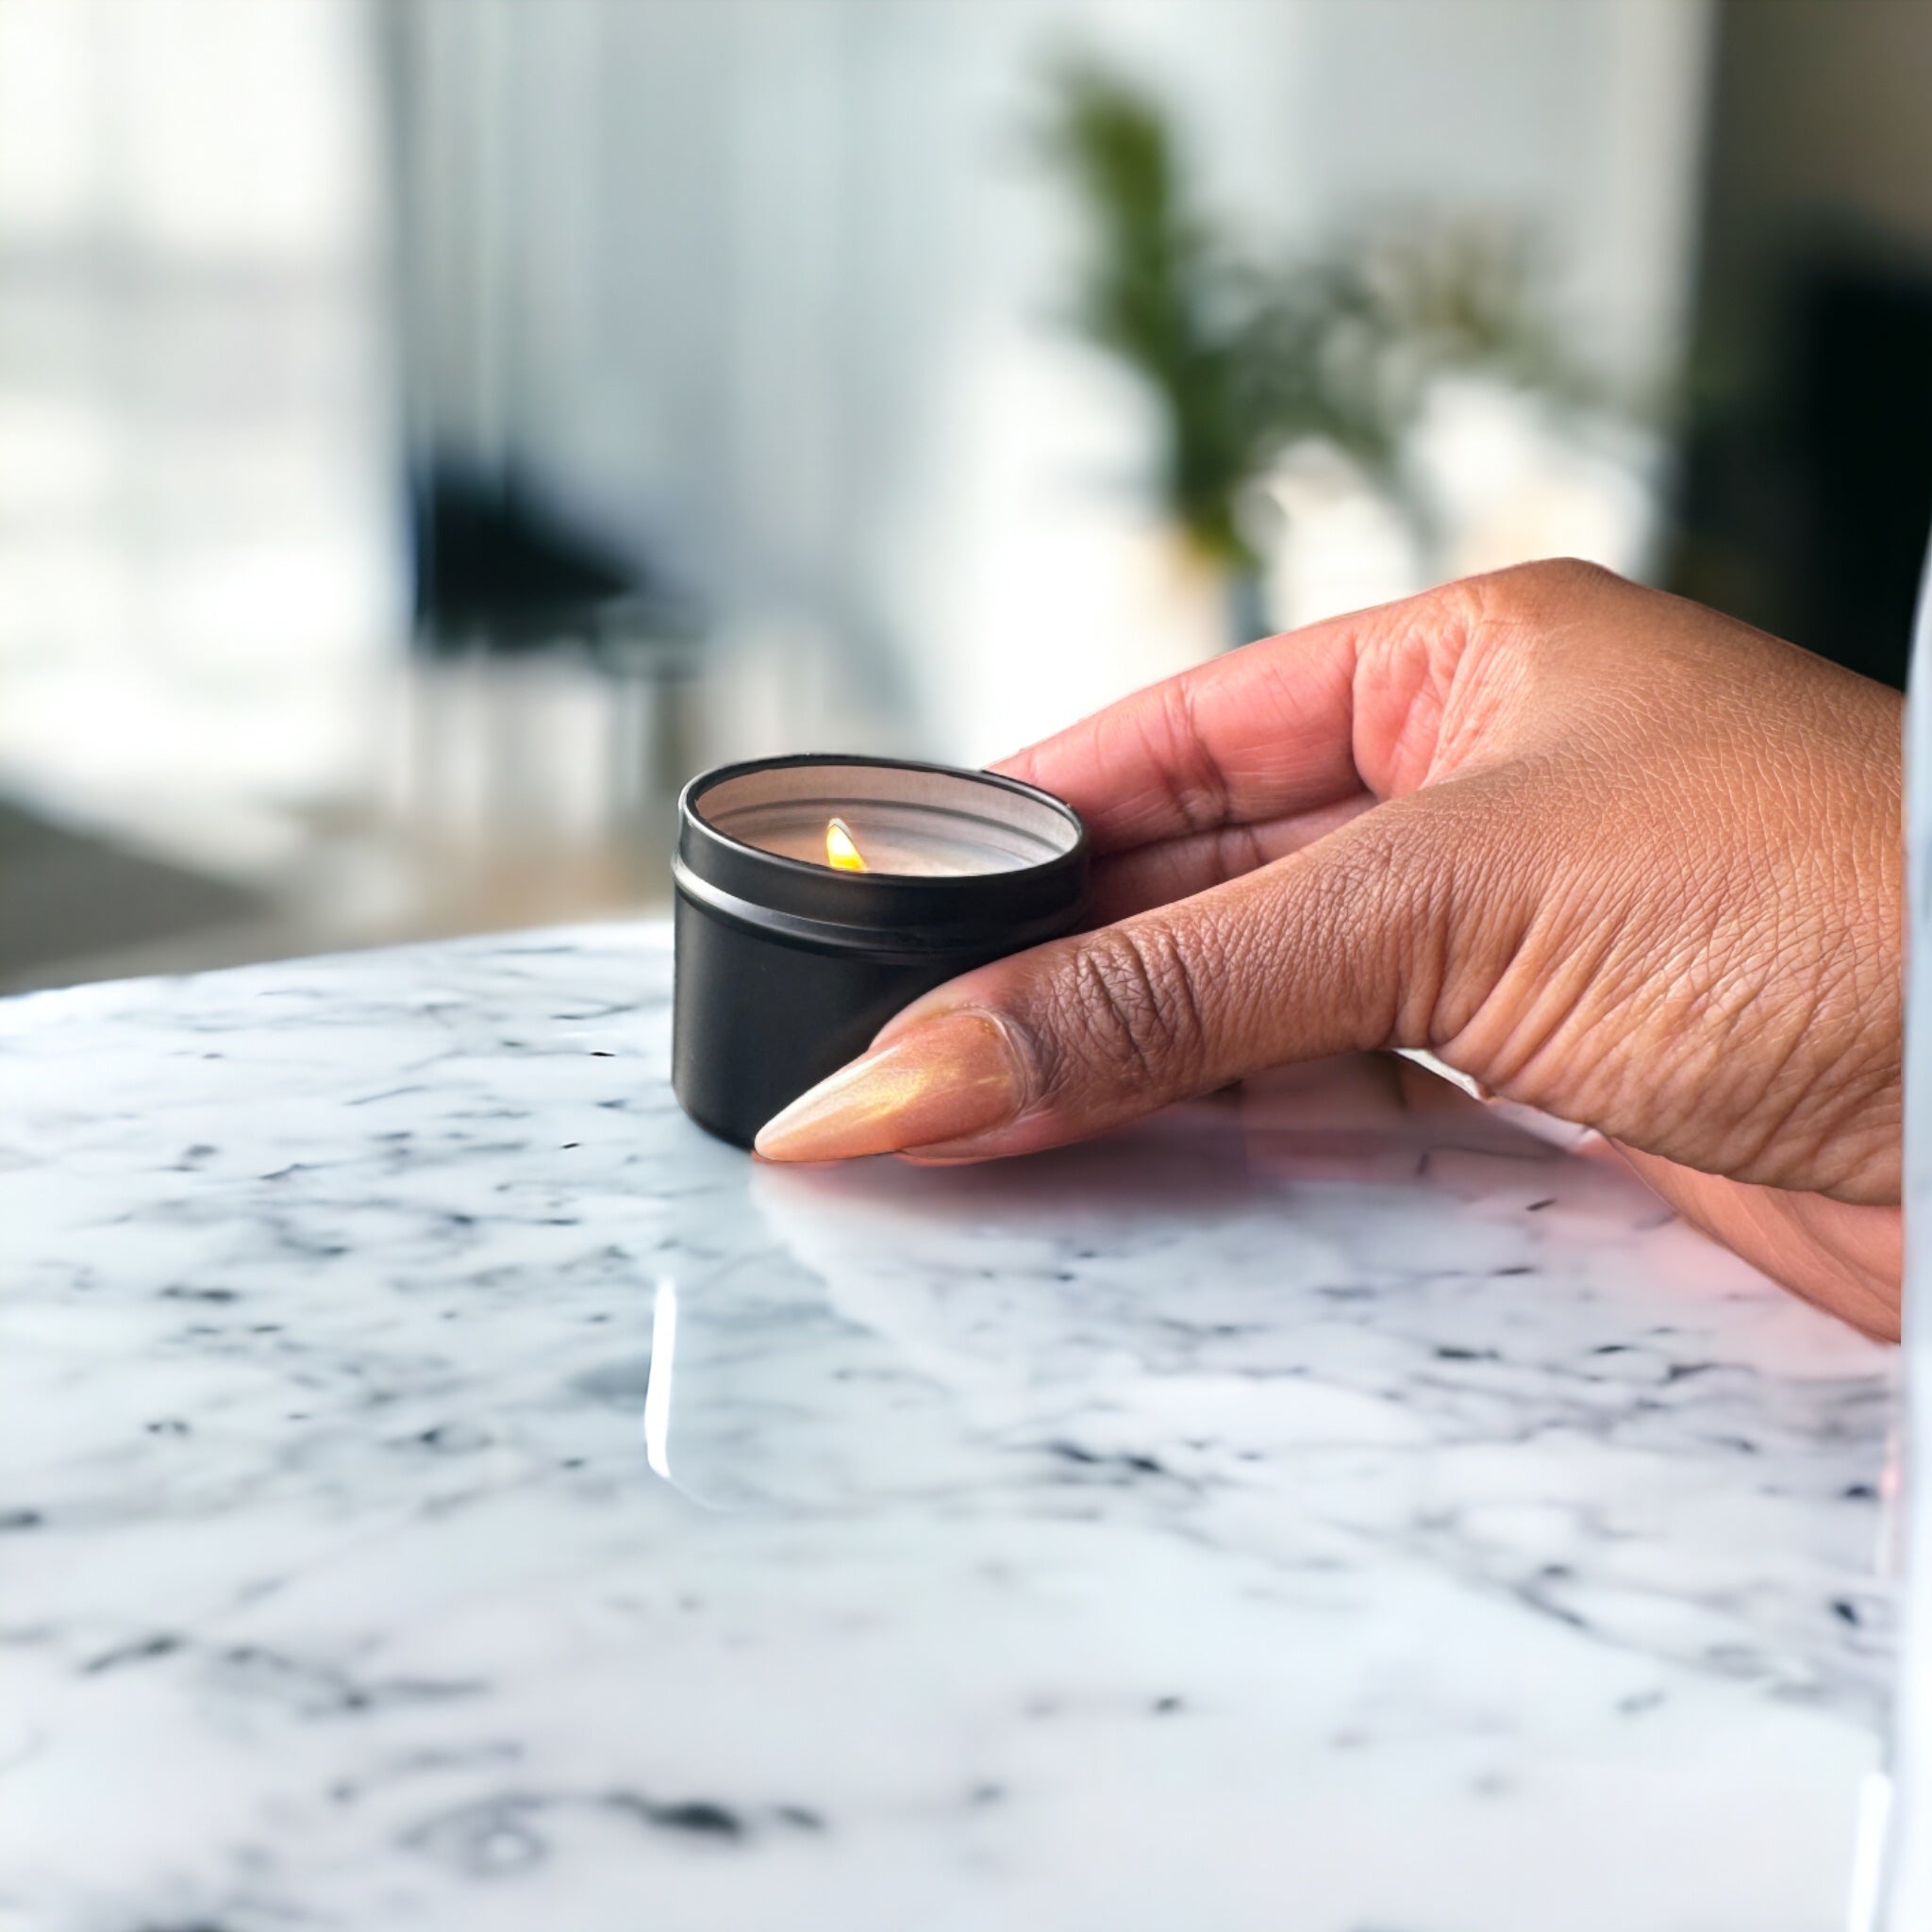 A person's hand with manicured nails gently holding a Predominantly Black A TINY TIN CANDLE - 06483 on a marble surface, conveying a sense of warmth and tranquility.